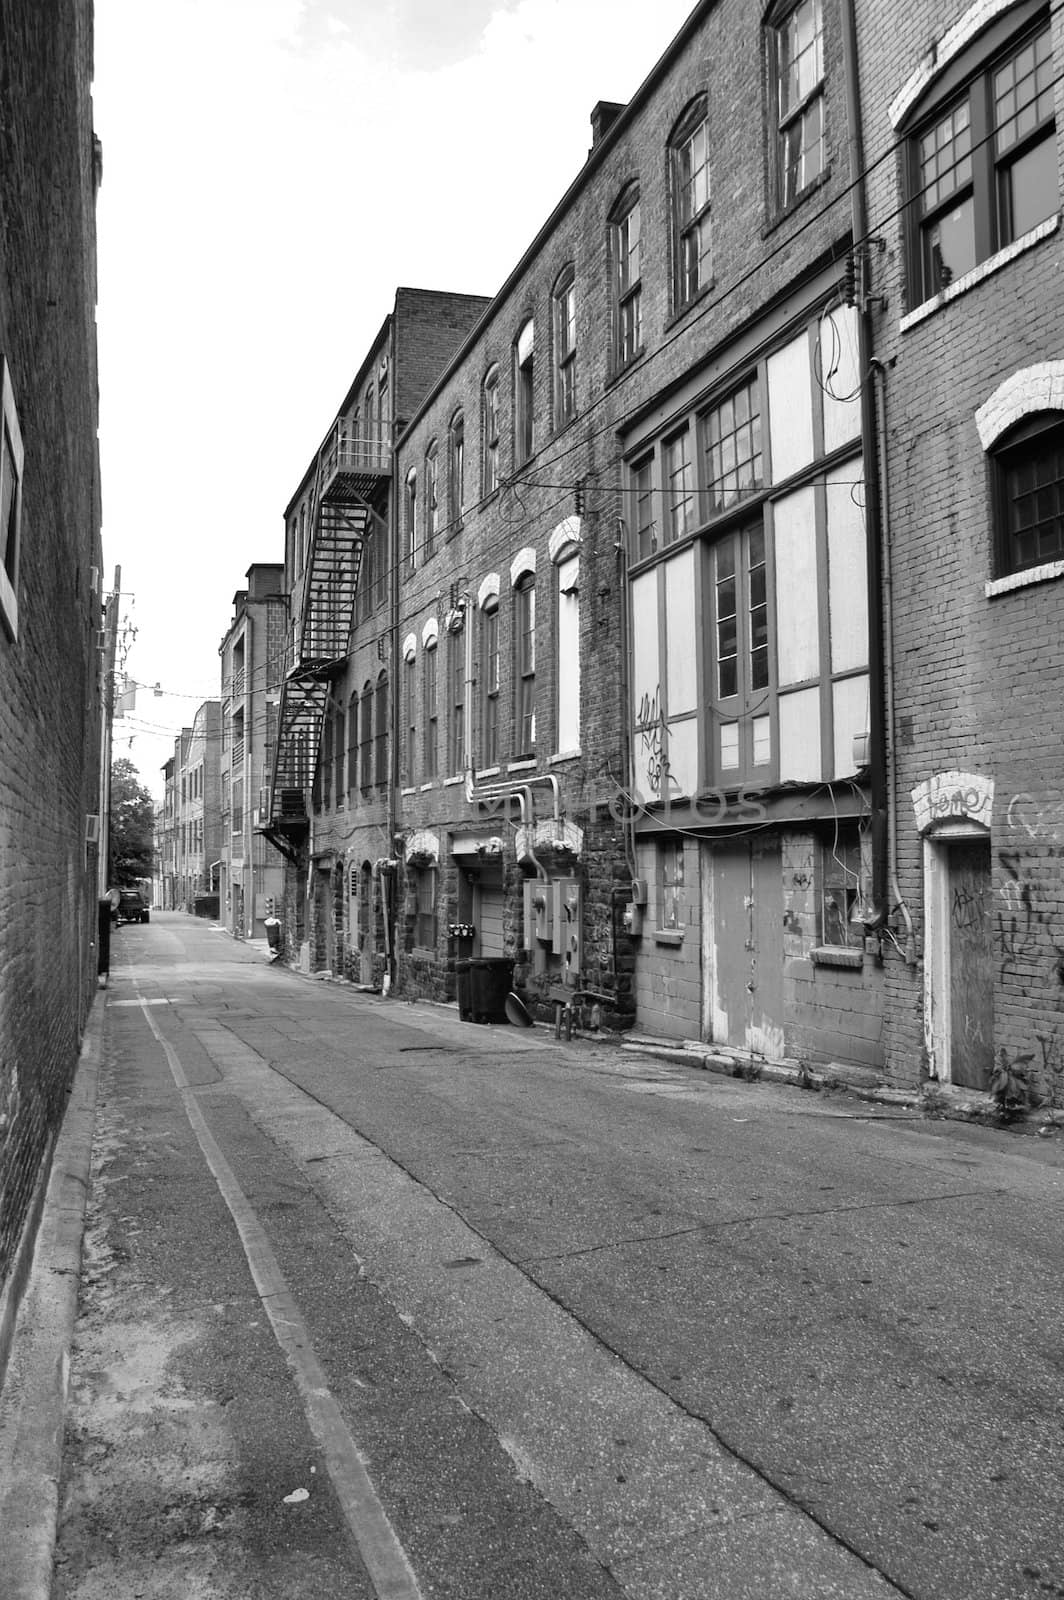 A view of a back alley in a southern town. Shown in black and white